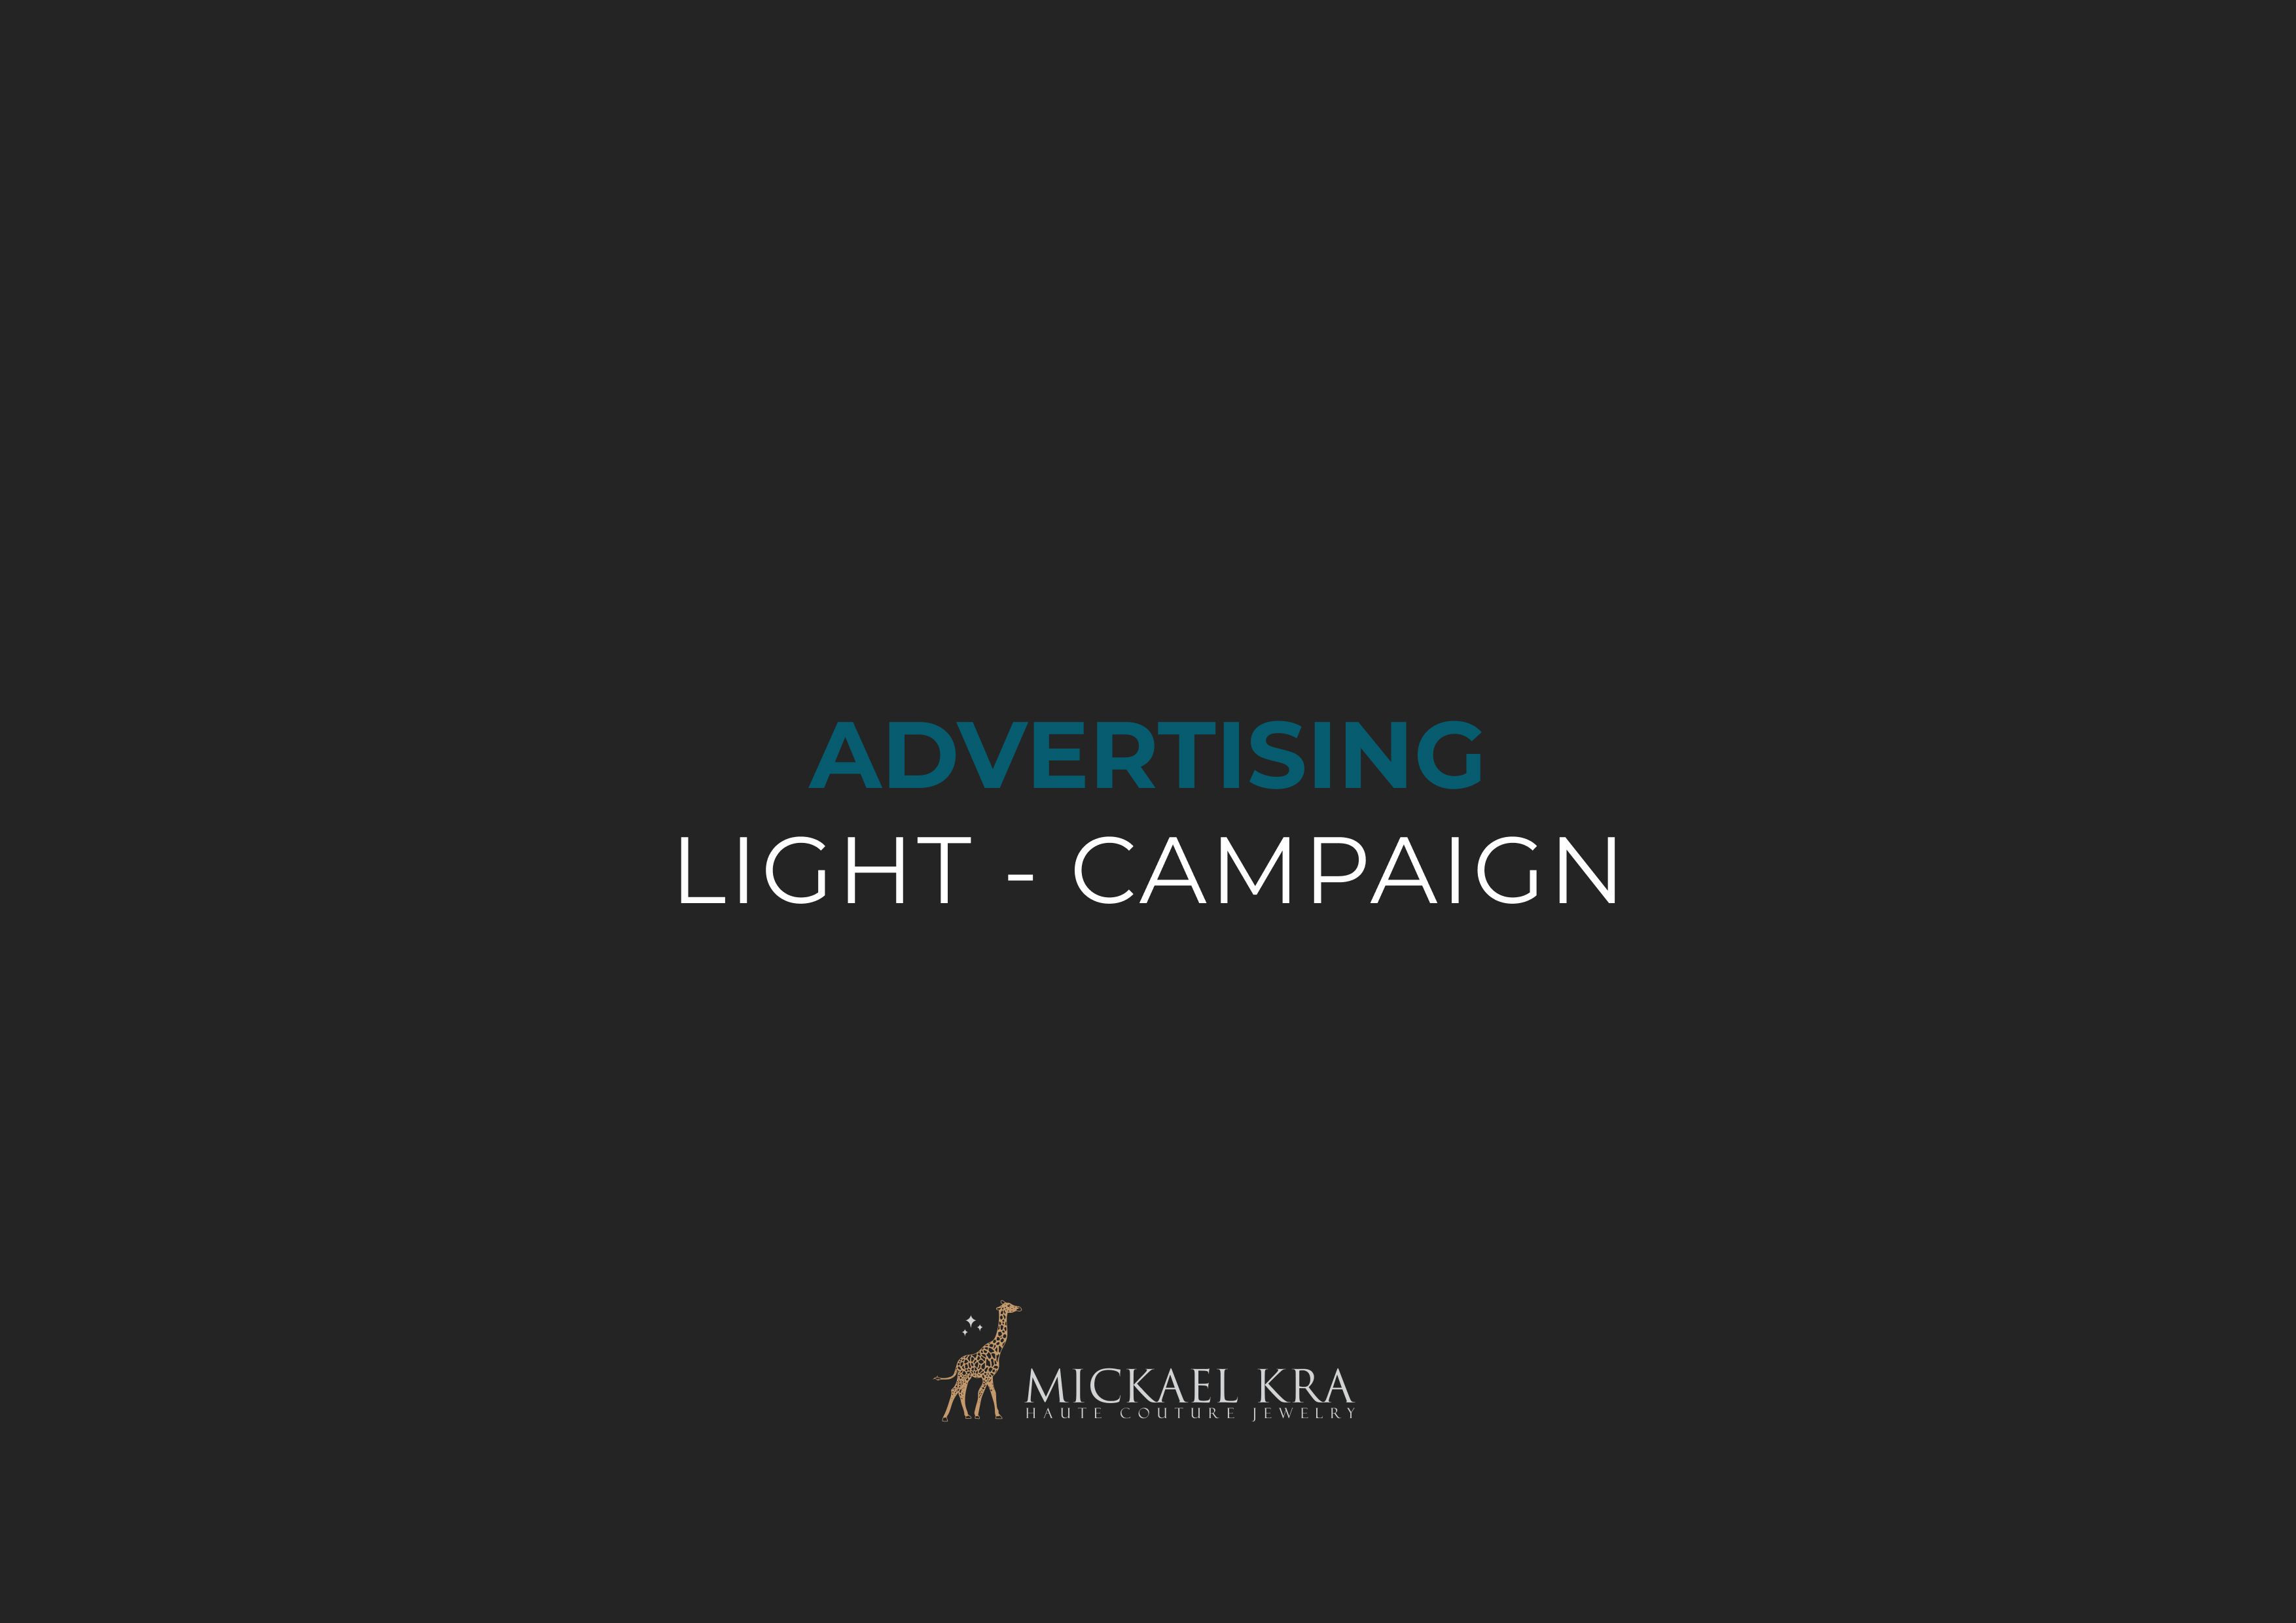 Light - Advertising campaign